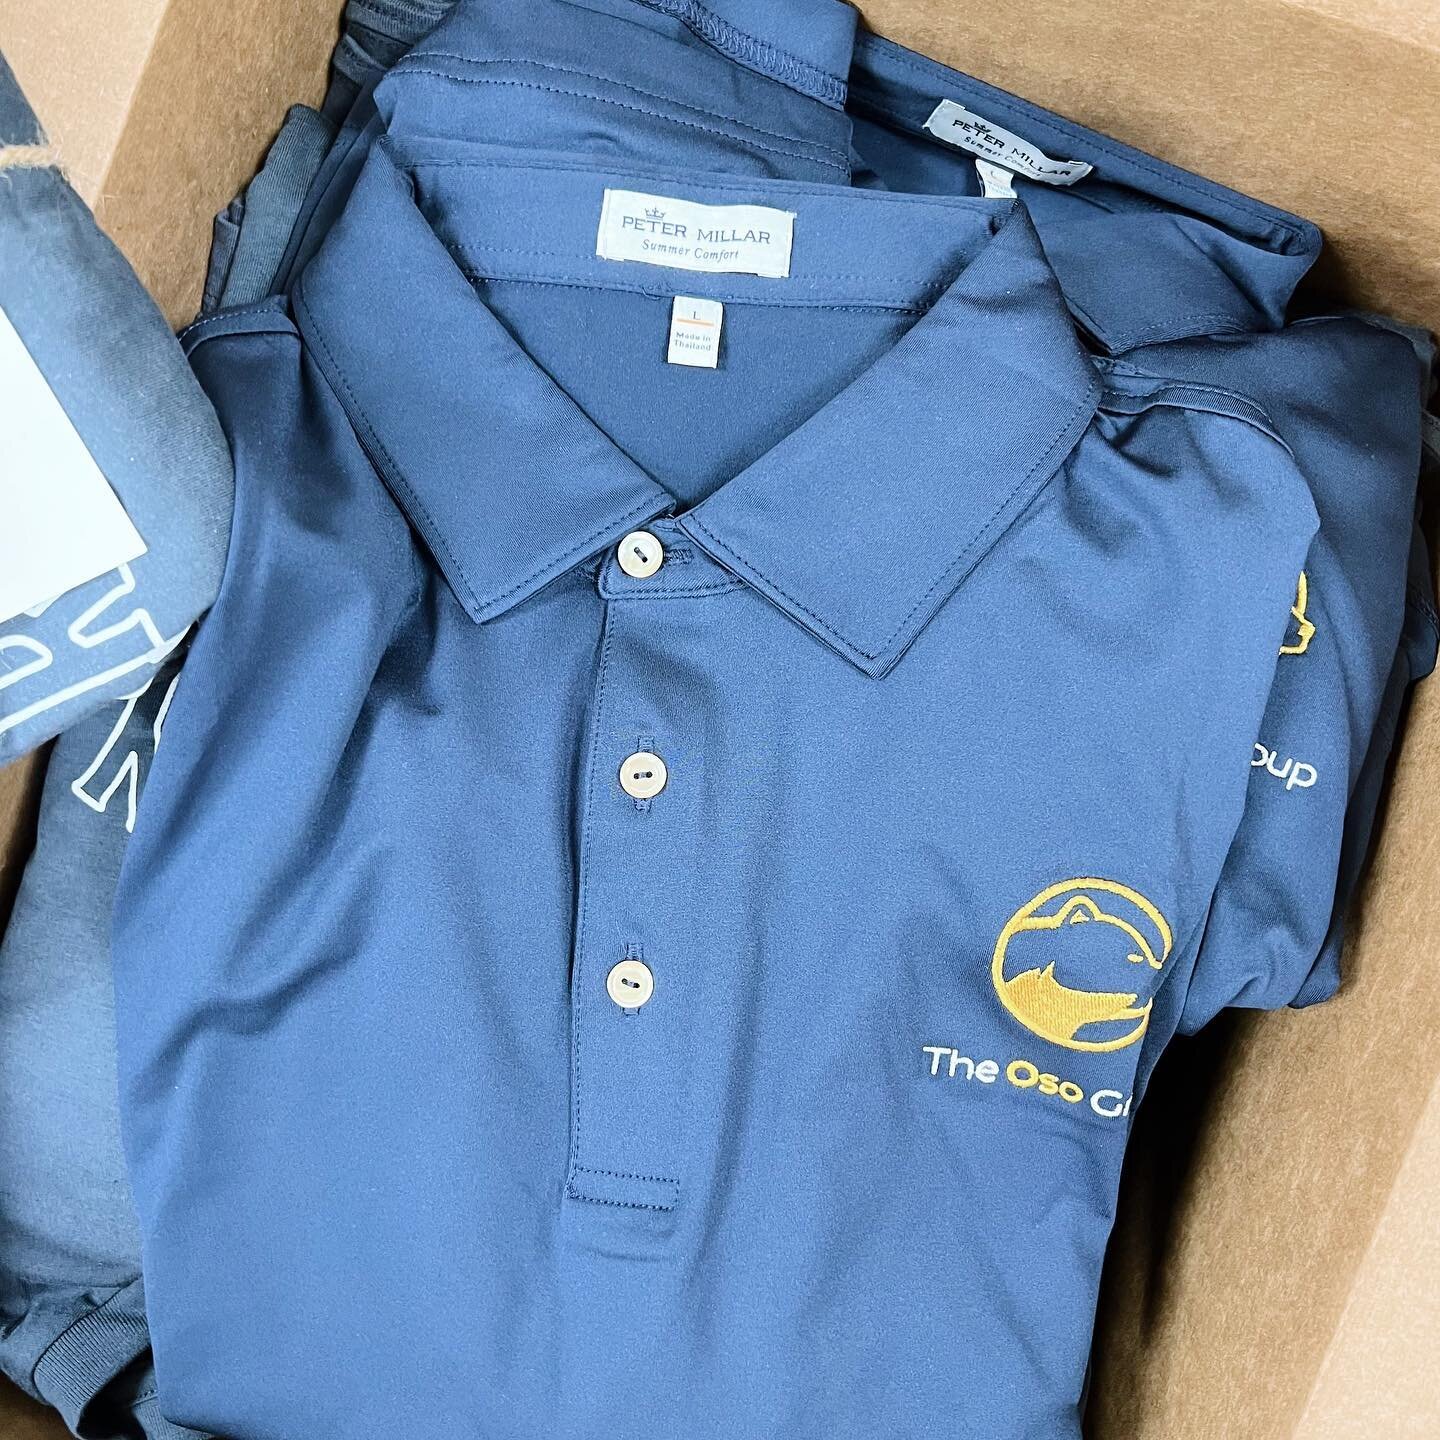 Did you know we now offer Peter Millar polos &amp; quarter zips?

We just finished a custom order for The Oso Group. The Oso Group engages with selective sub-contractors on multi-family residential projects throughout the Southern US to provide reven